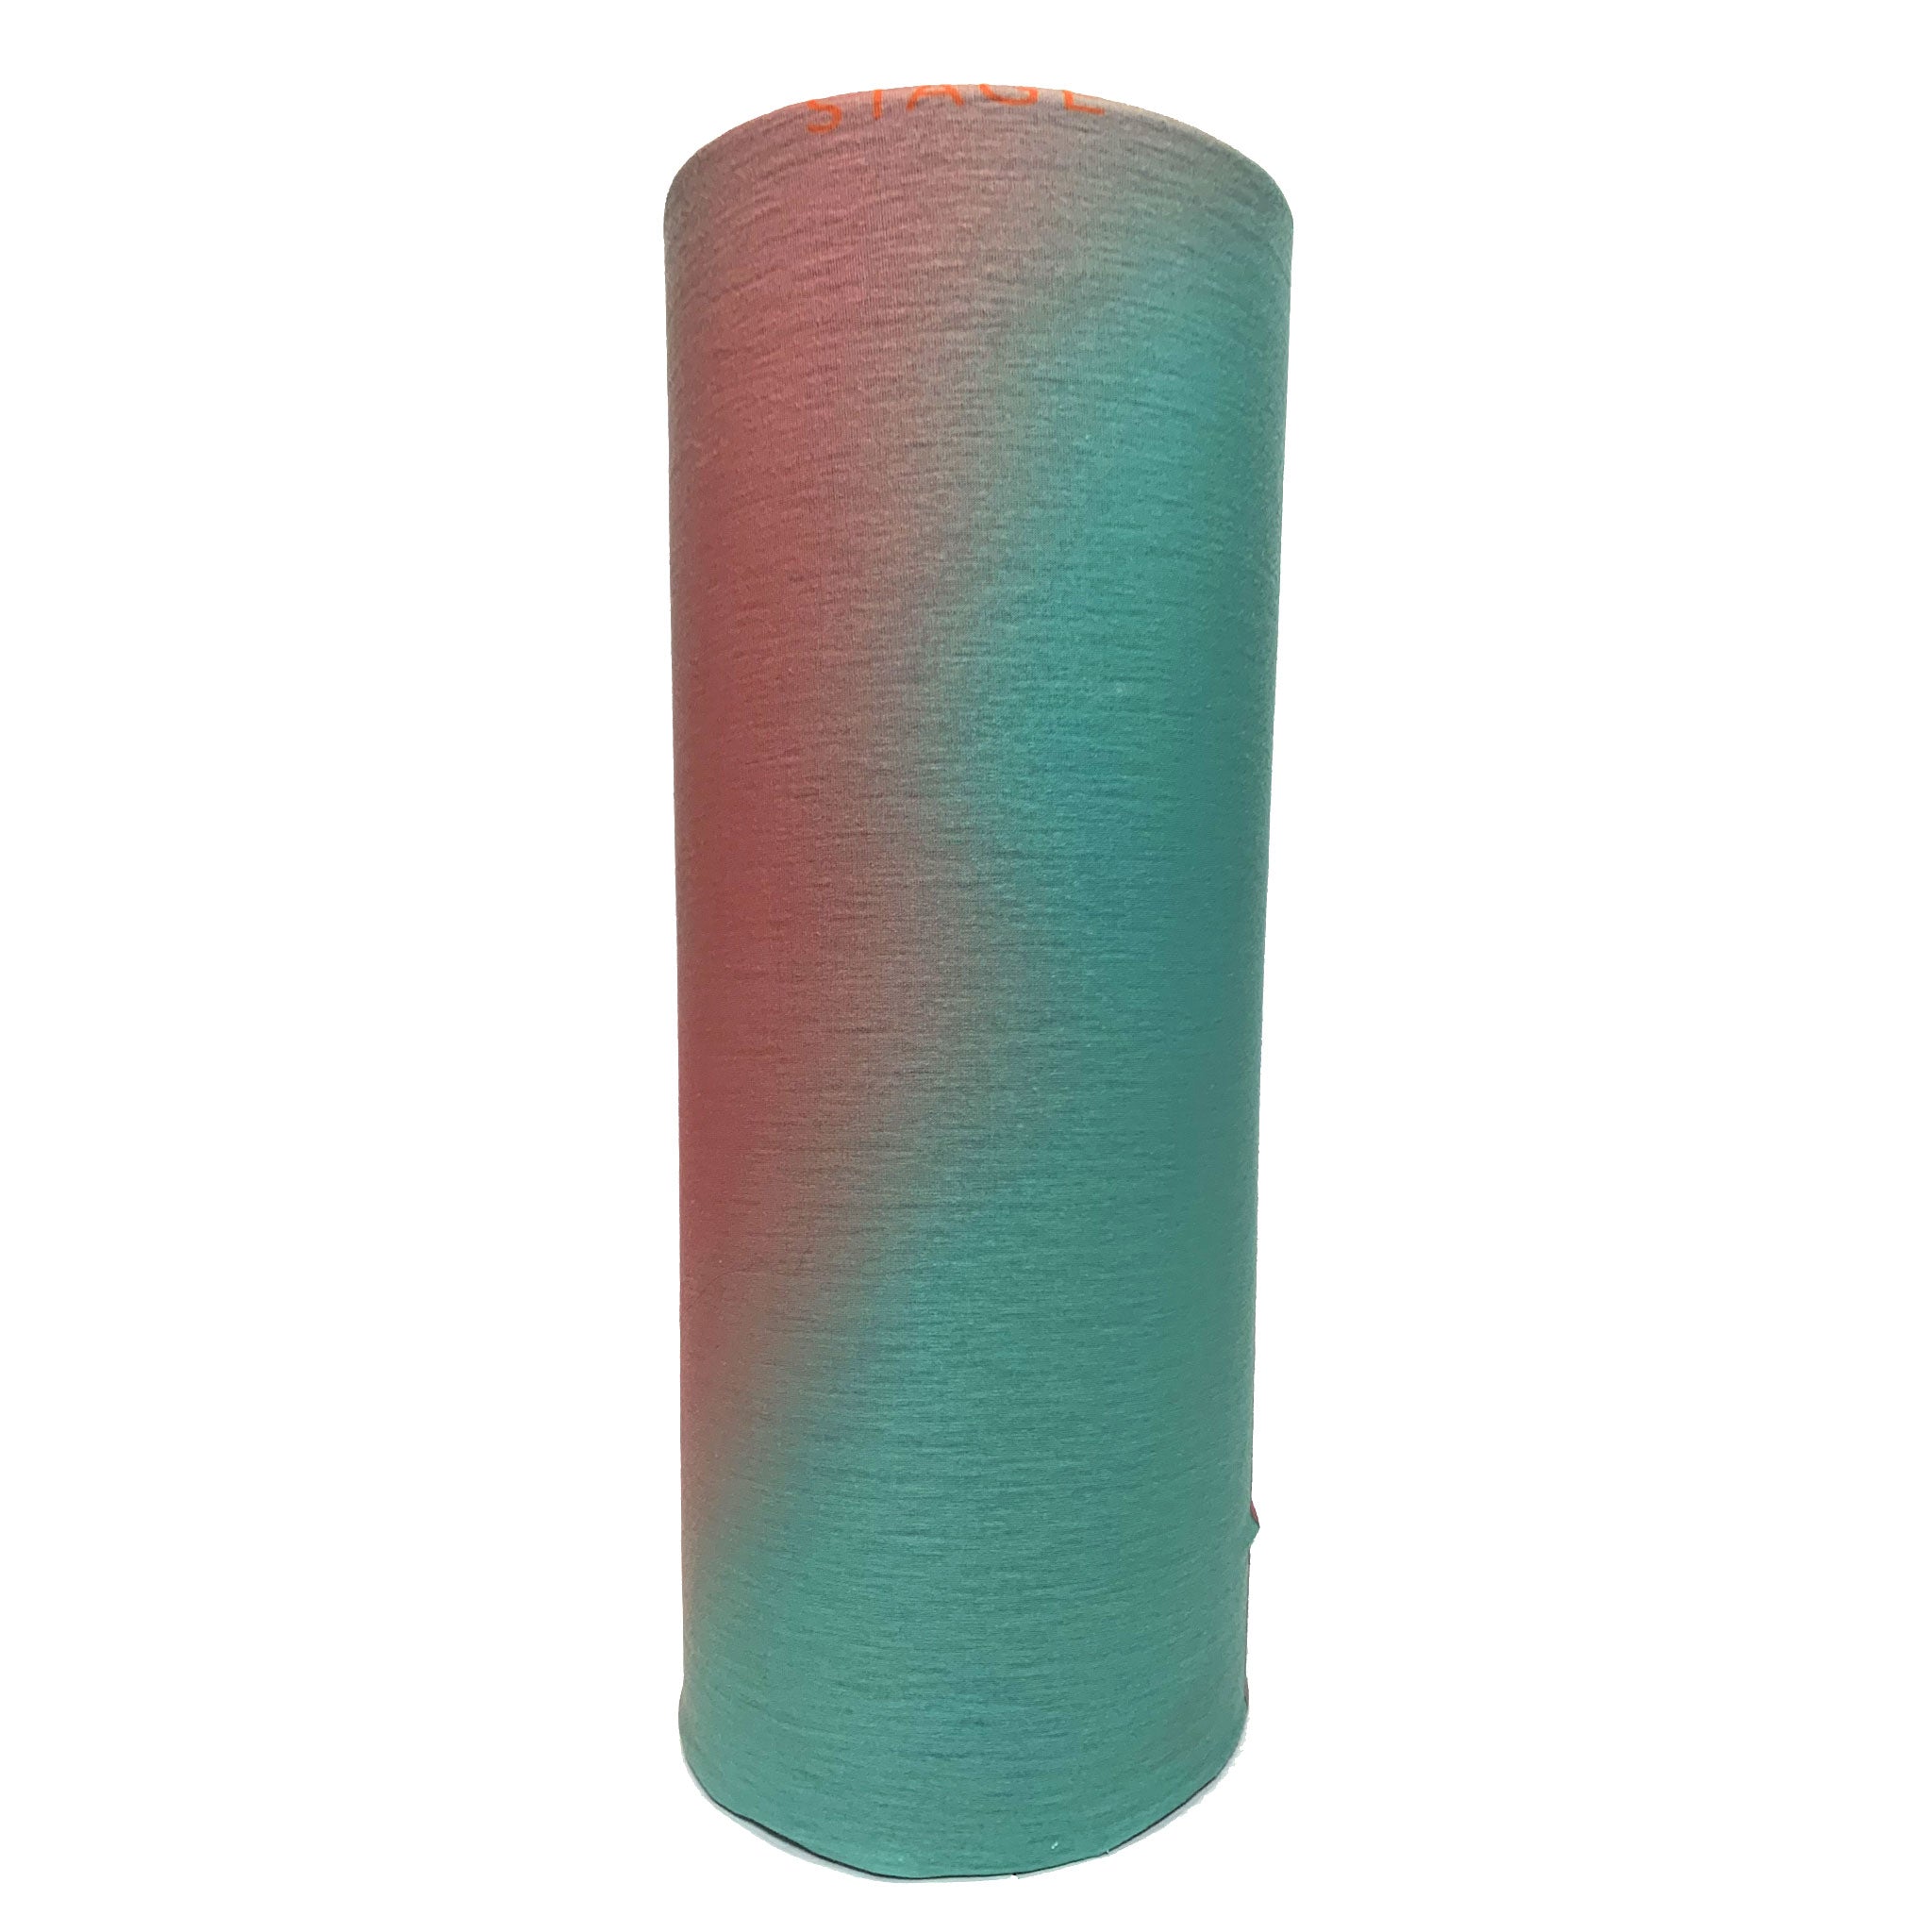 Jr. Face Tube - Cotton Candy - Single Layer